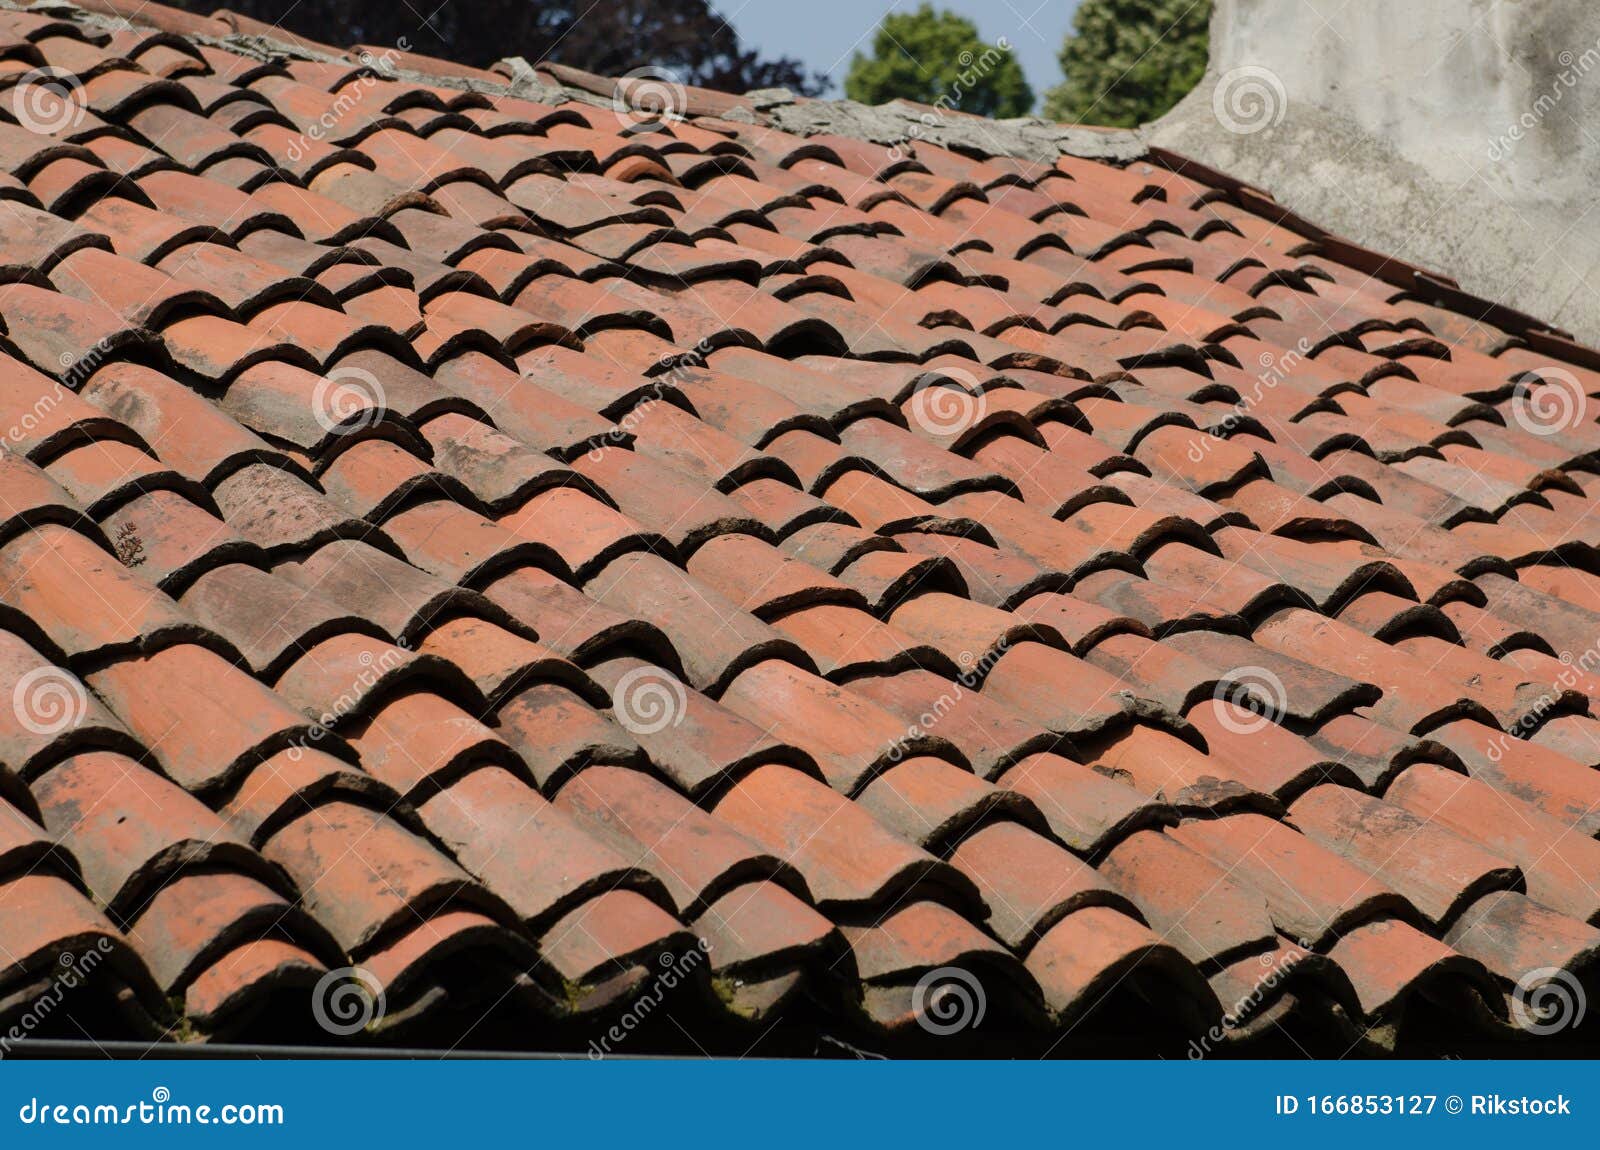 house with pitched roofs with brick tiles.